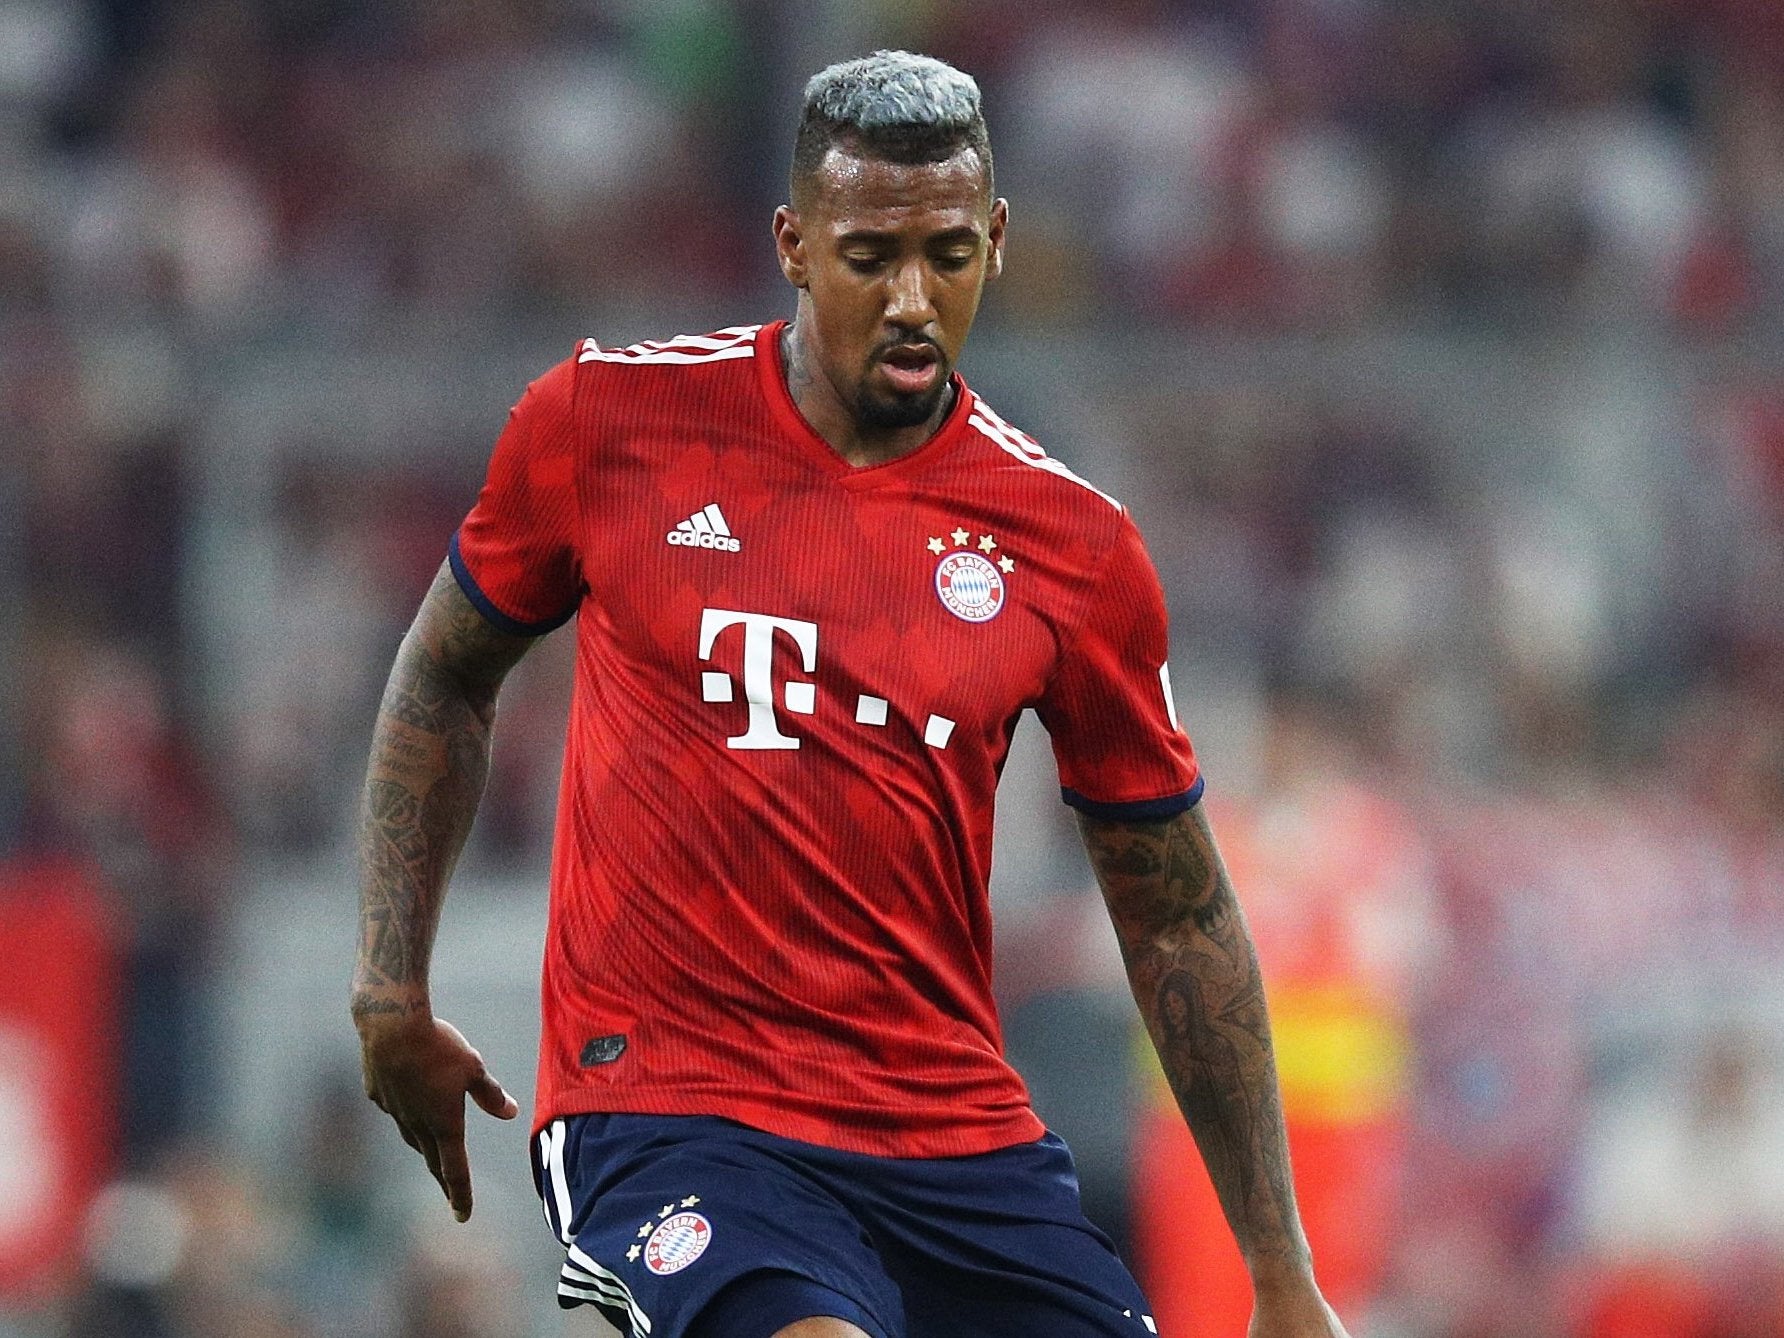 Transfer news - live updates: Manchester United turn to Jerome Boateng, Everton agree Mina deal, Courtois set for Chelsea talks plus Liverpool, Arsenal